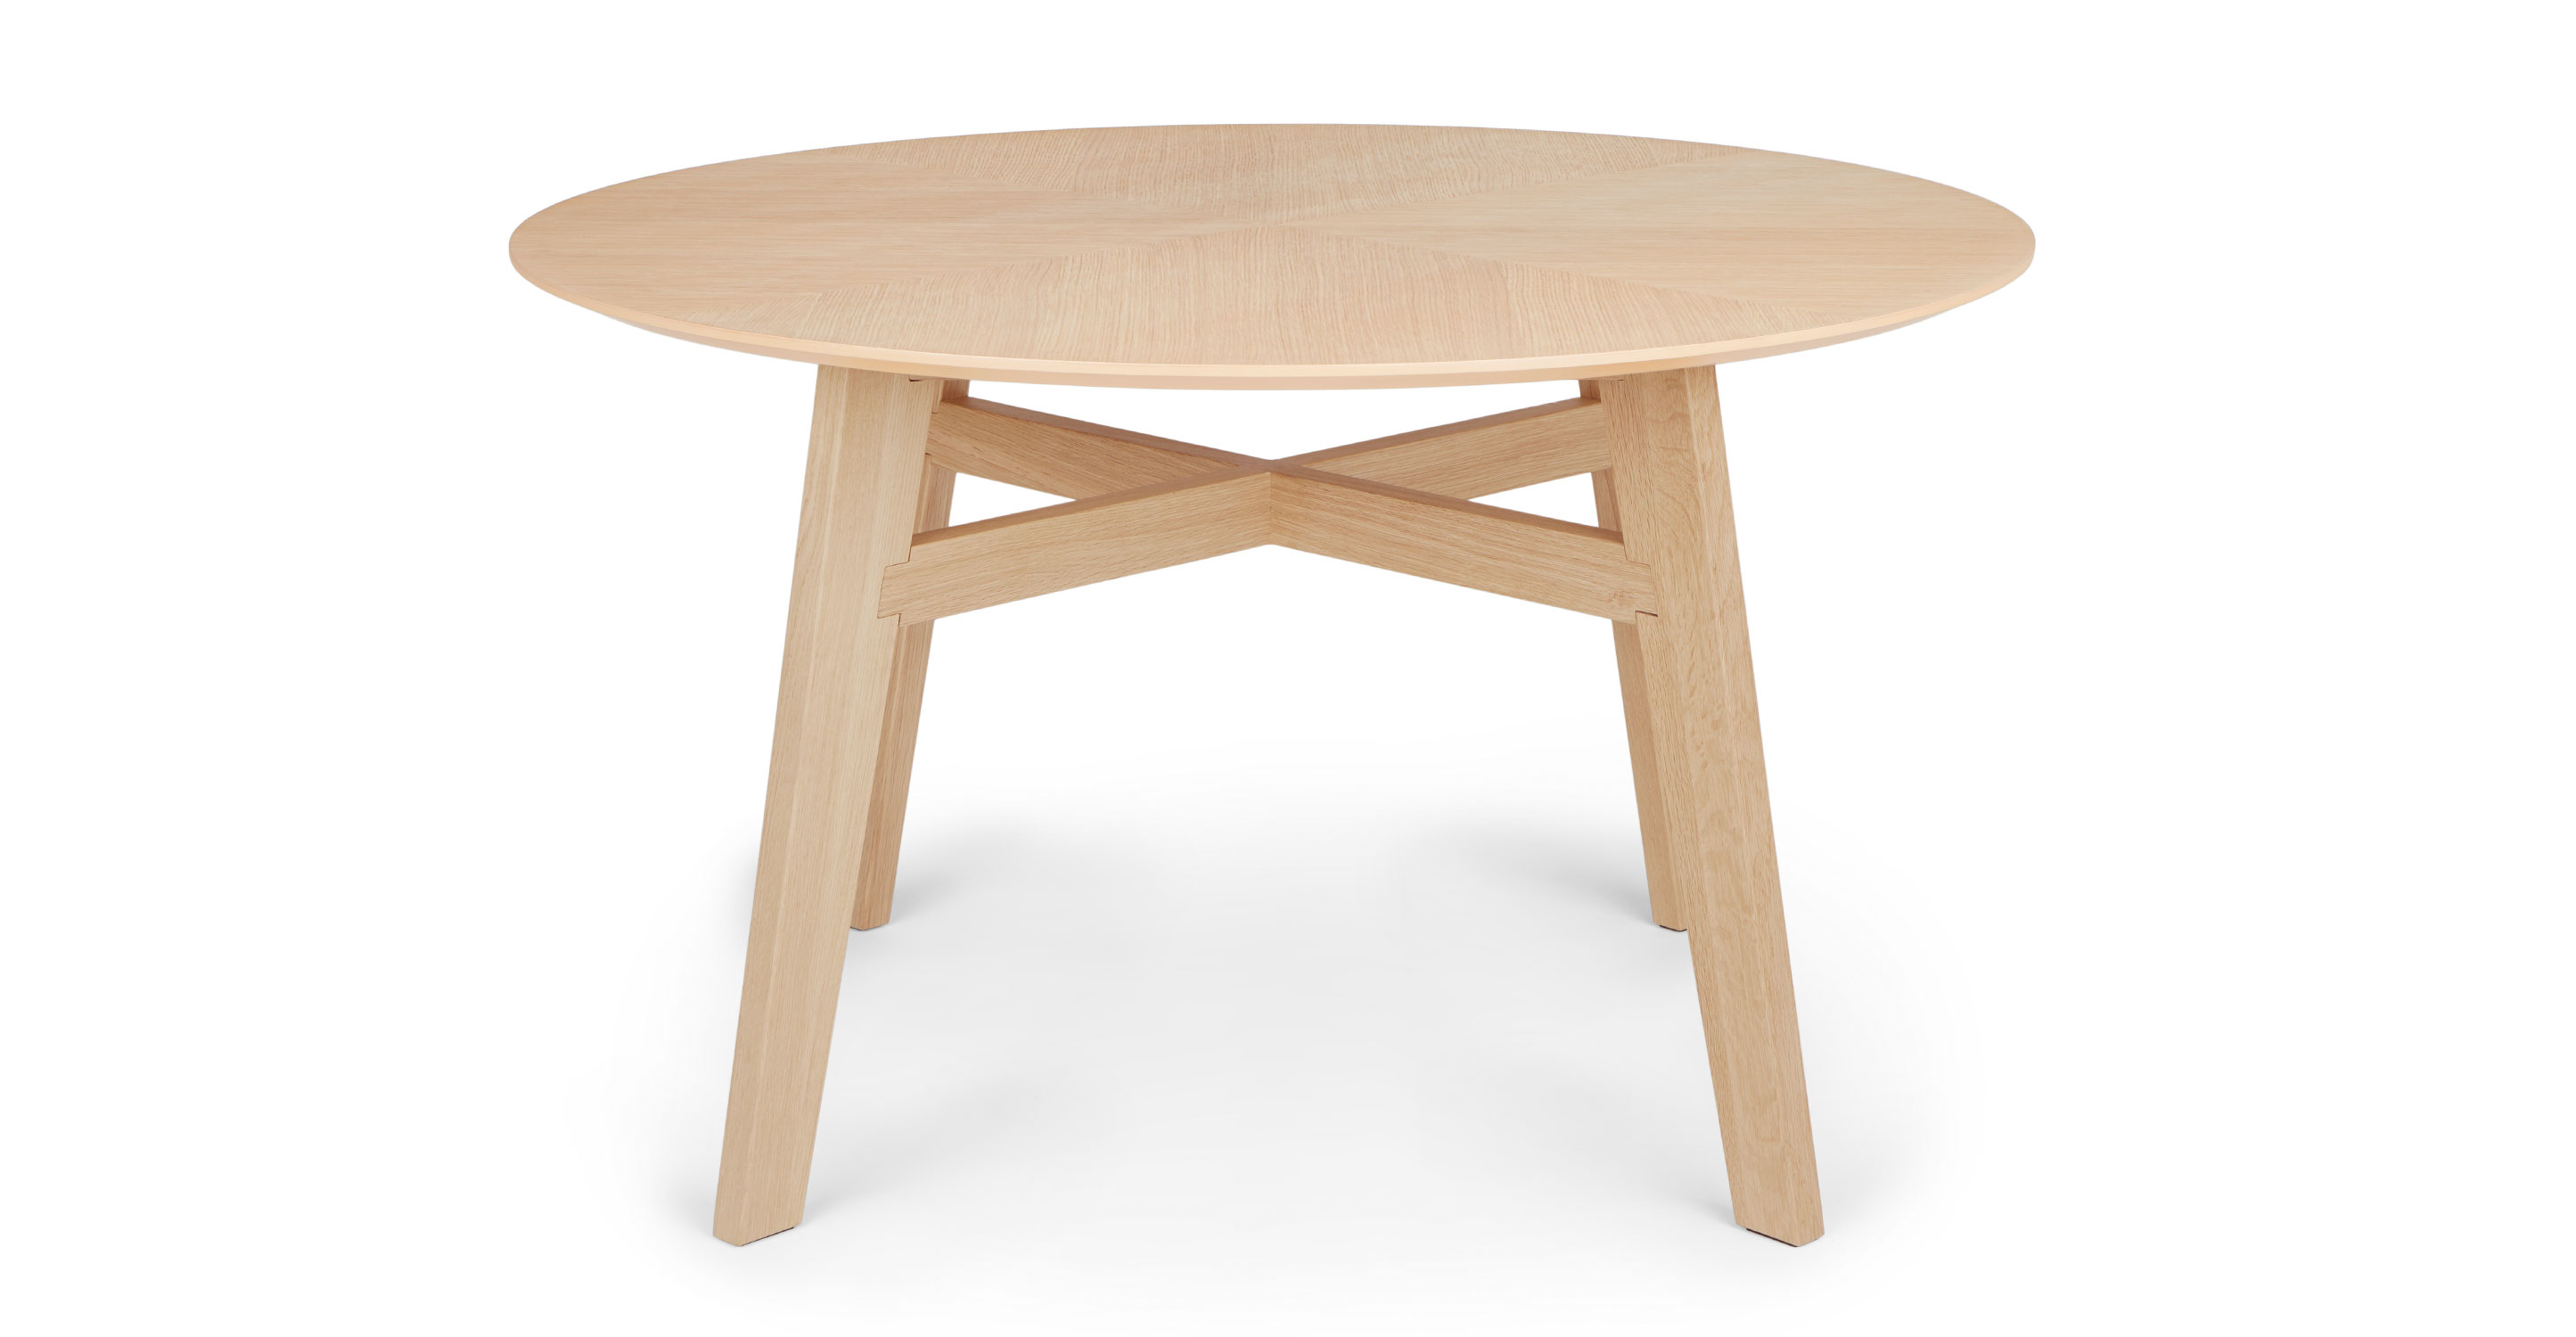 Round Light Oak Dining Table For 4, Oak Round Kitchen Table